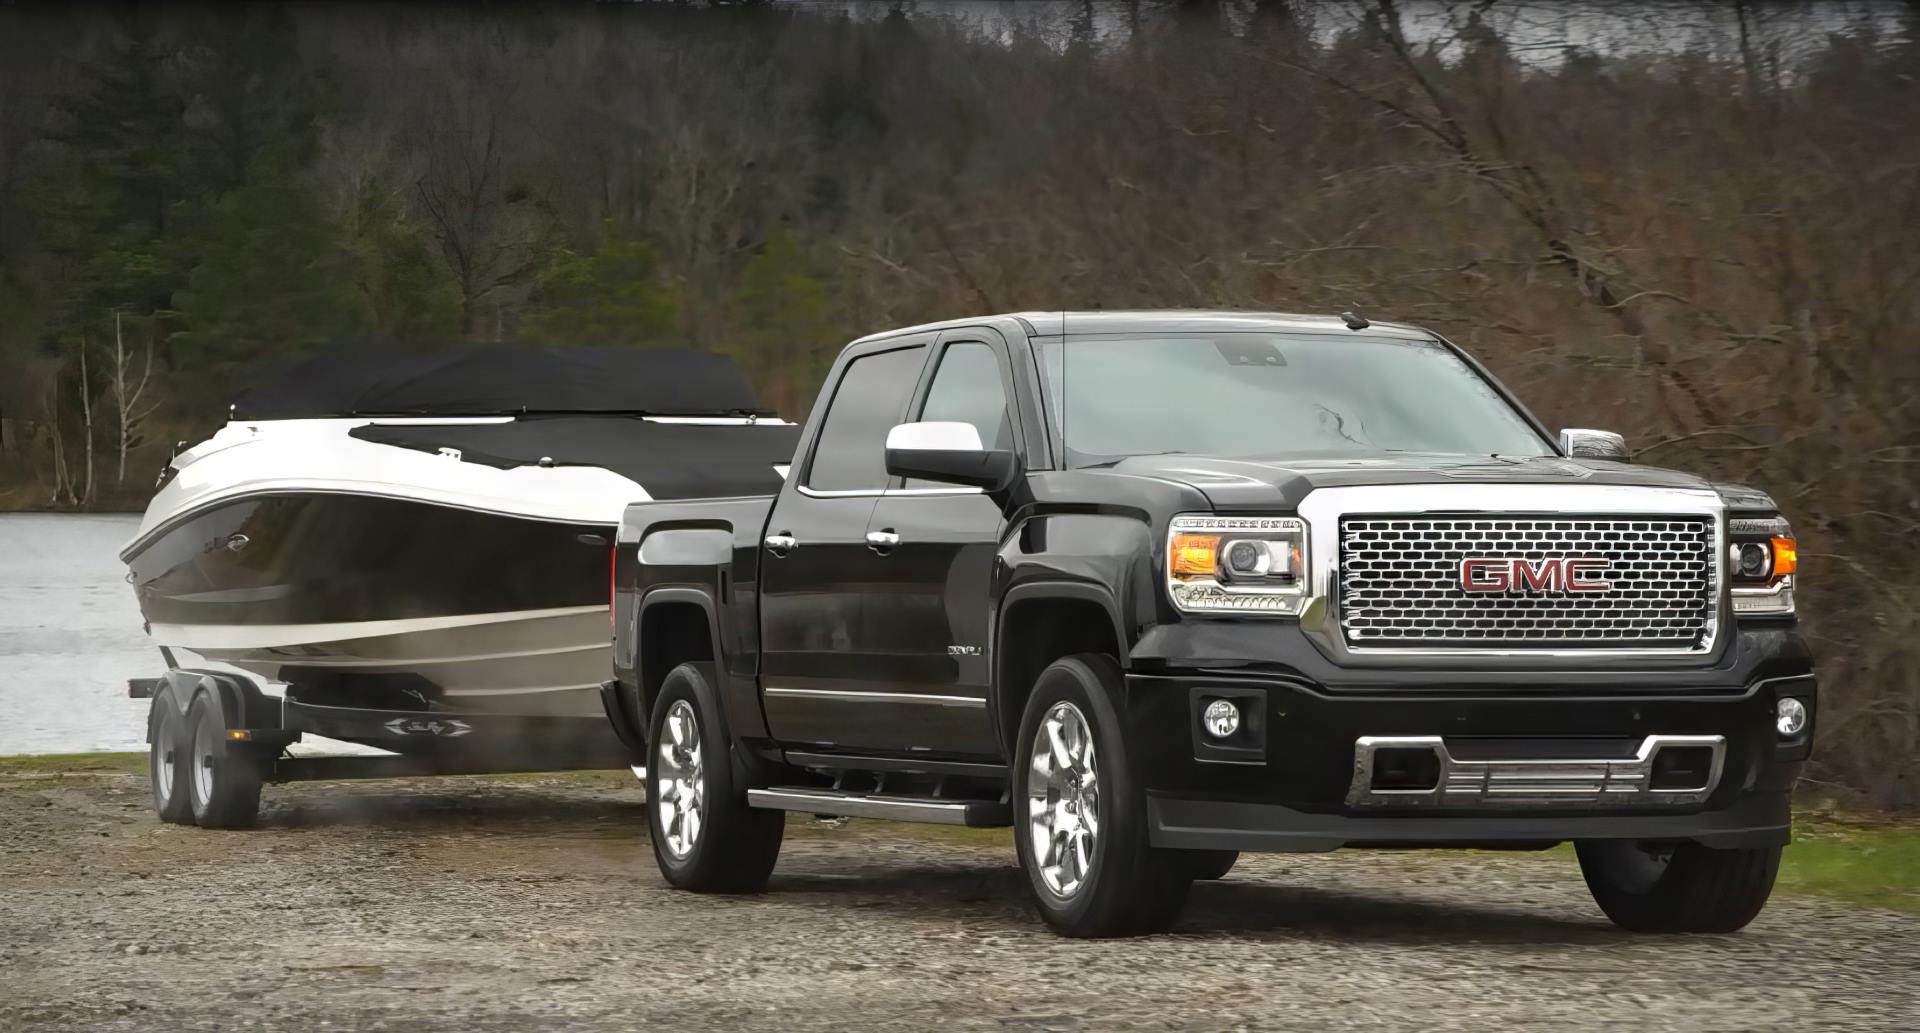 A GMC Sierra 1500 Denali in 3/4 profile towing a boat on a cloudy day